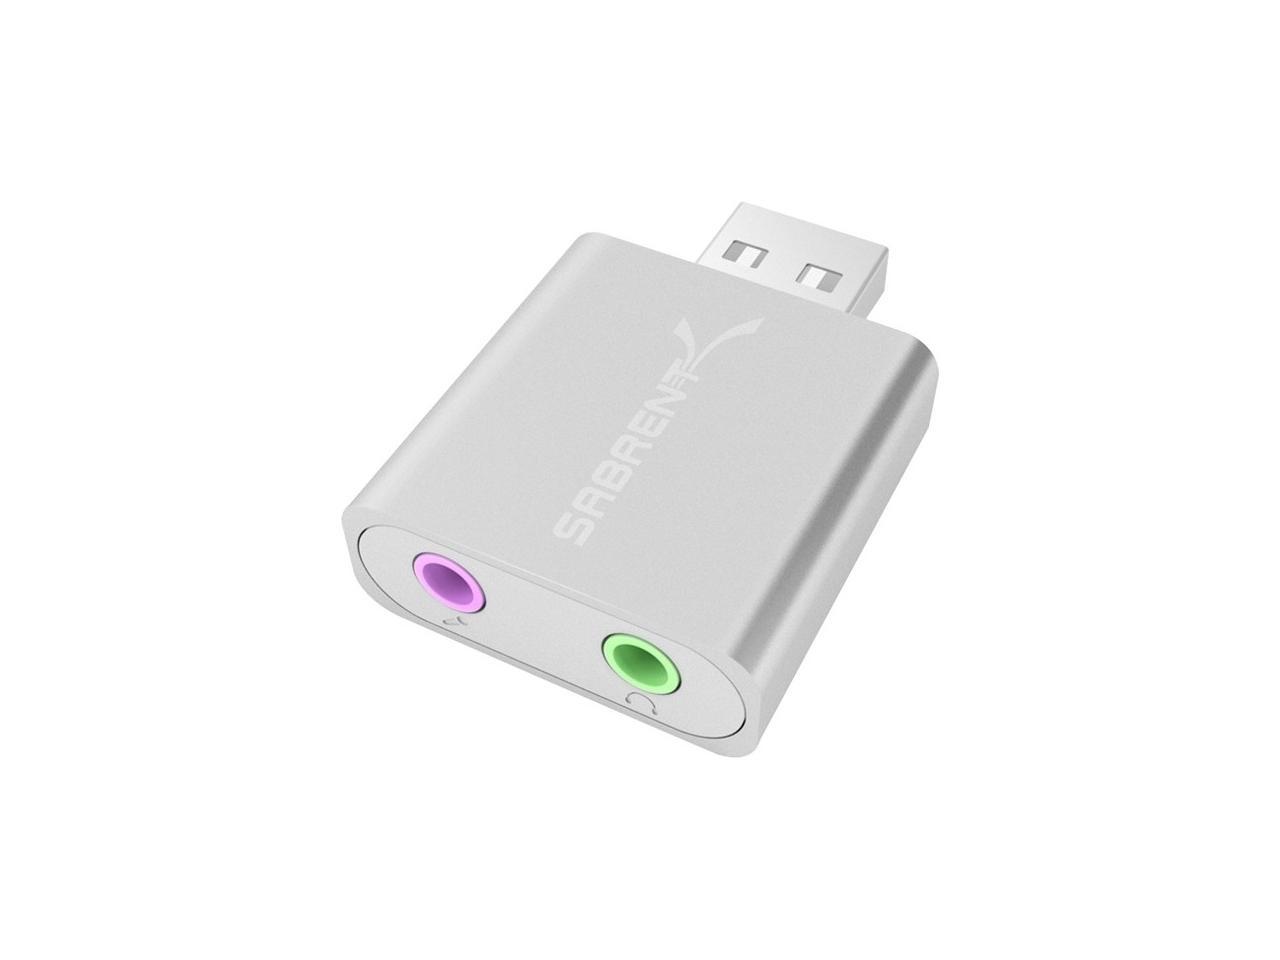 SABRENT AU-EMAC USB EXTERNAL STEREO SOUND ADAPTER